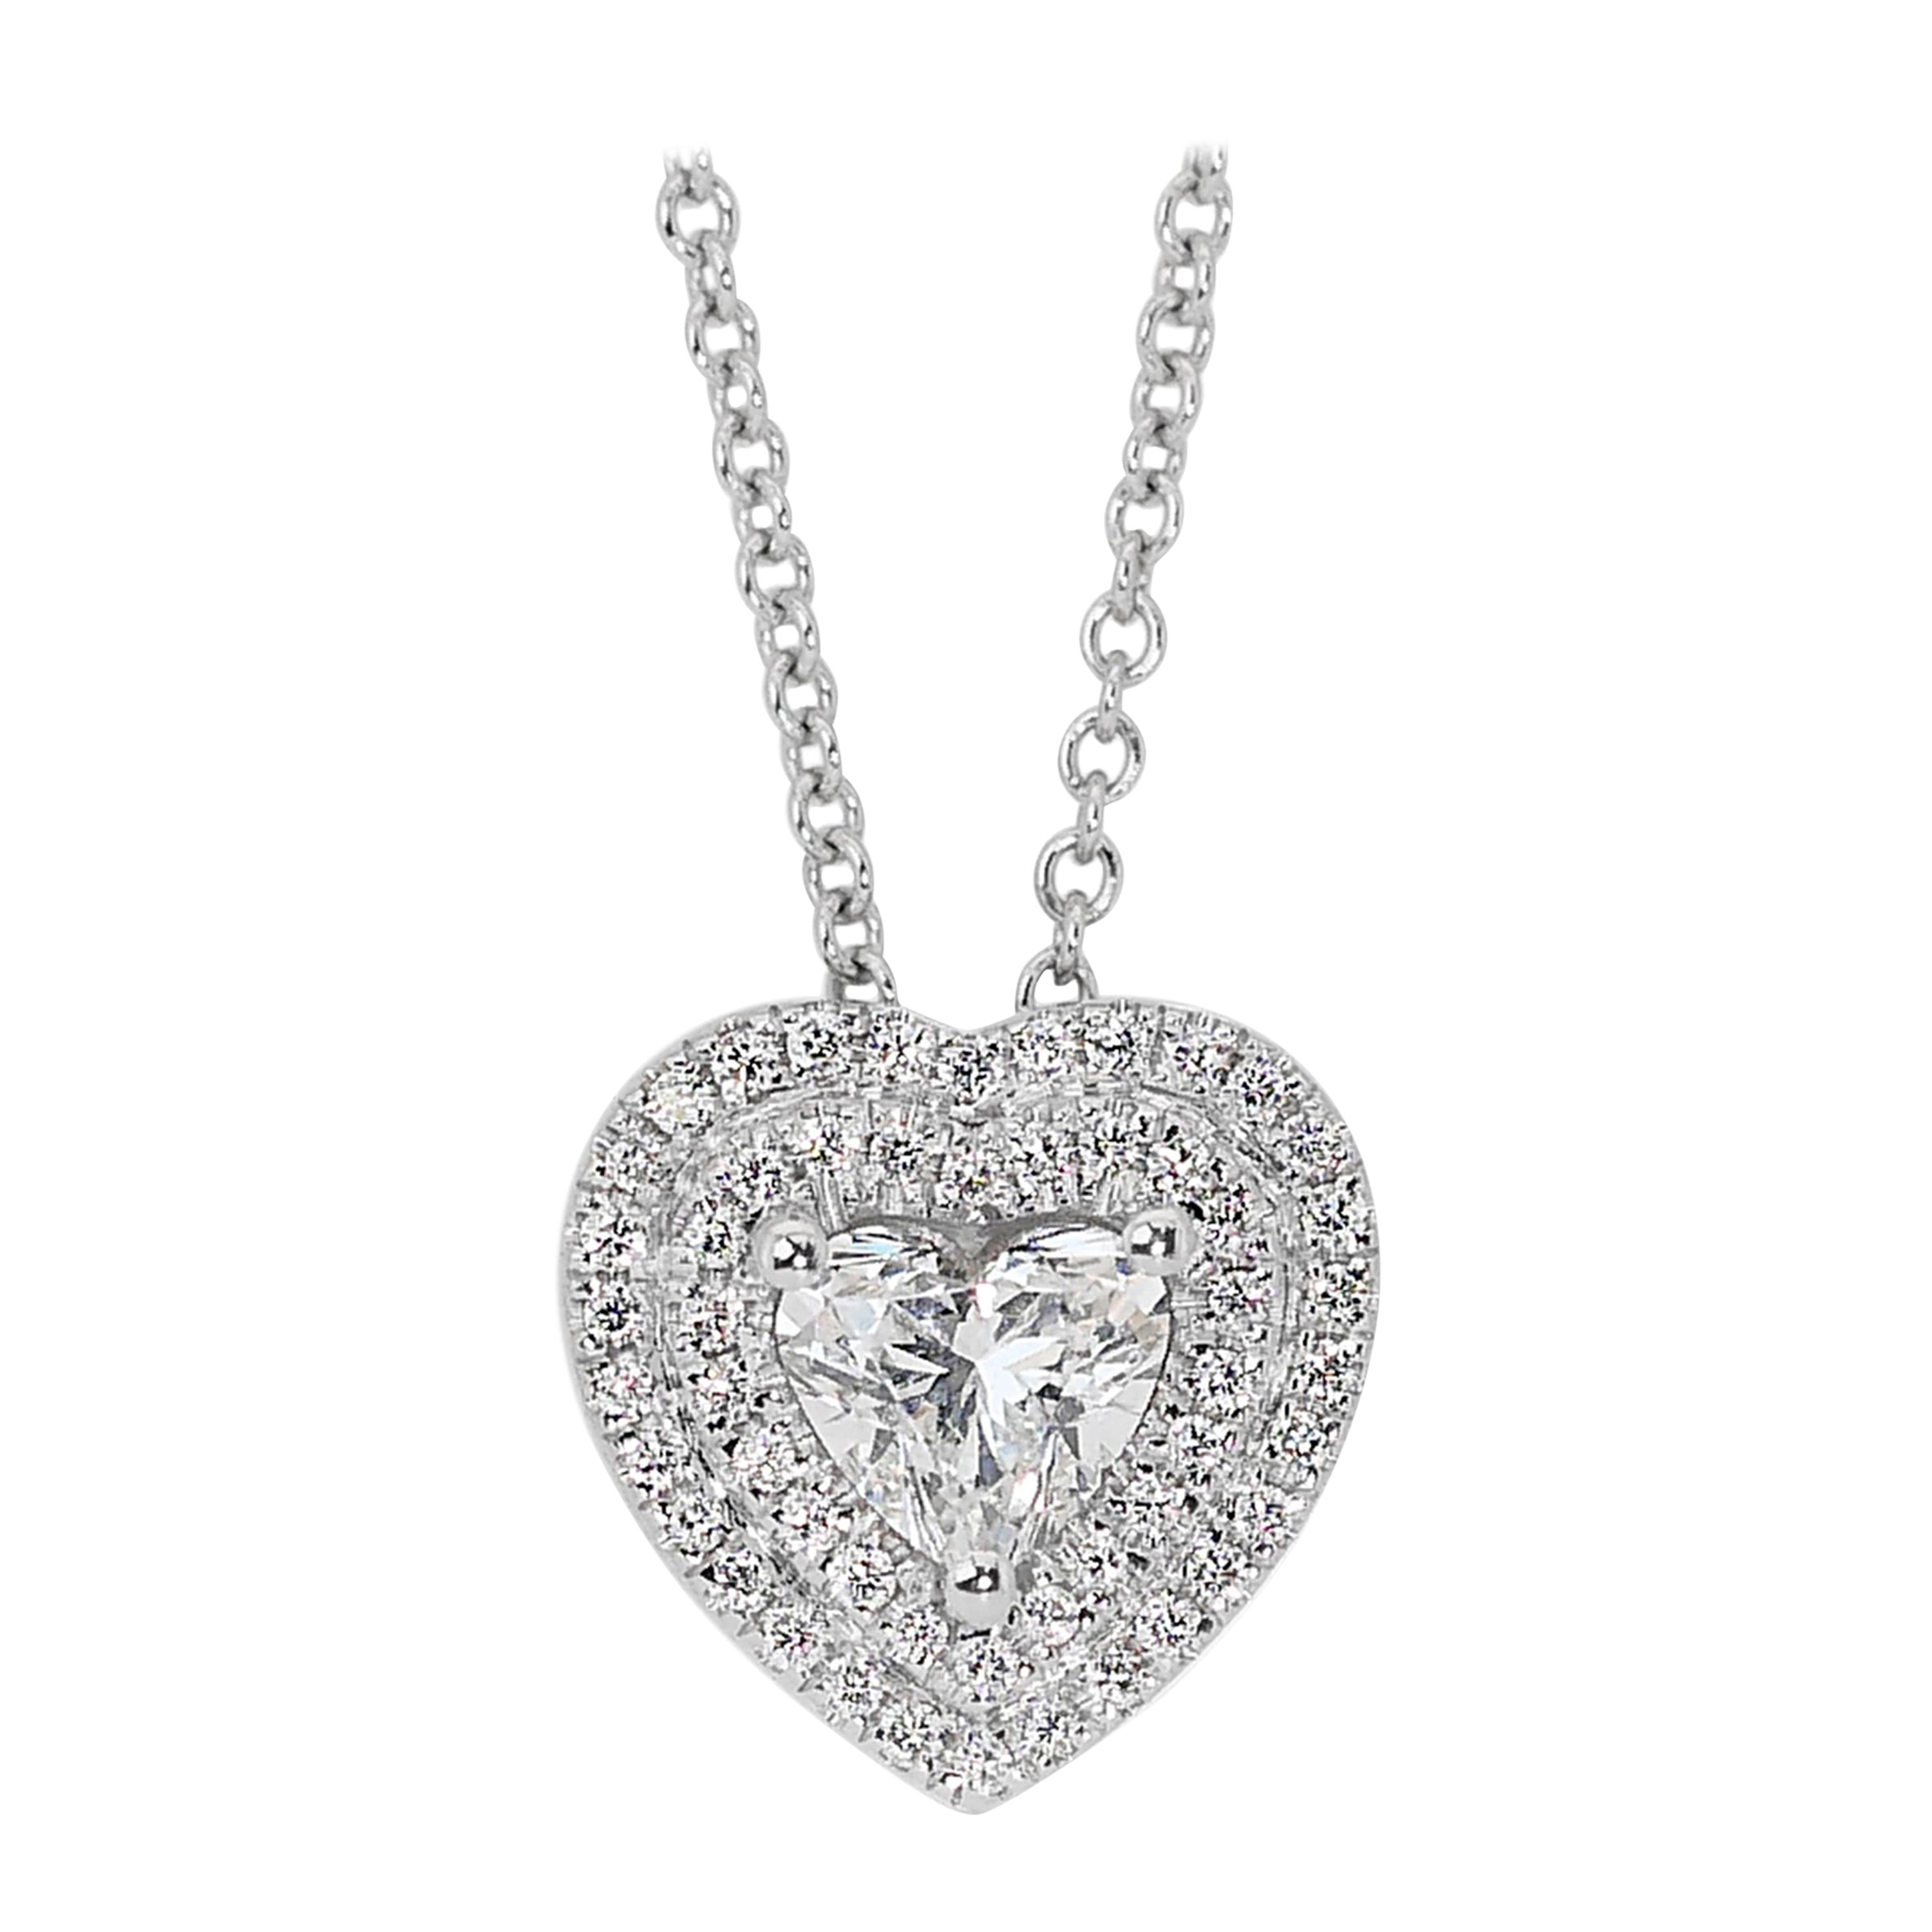 Elegant 0.80ct Heart-Shaped Diamond Halo Necklace in 18k White Gold - GIA Certif For Sale